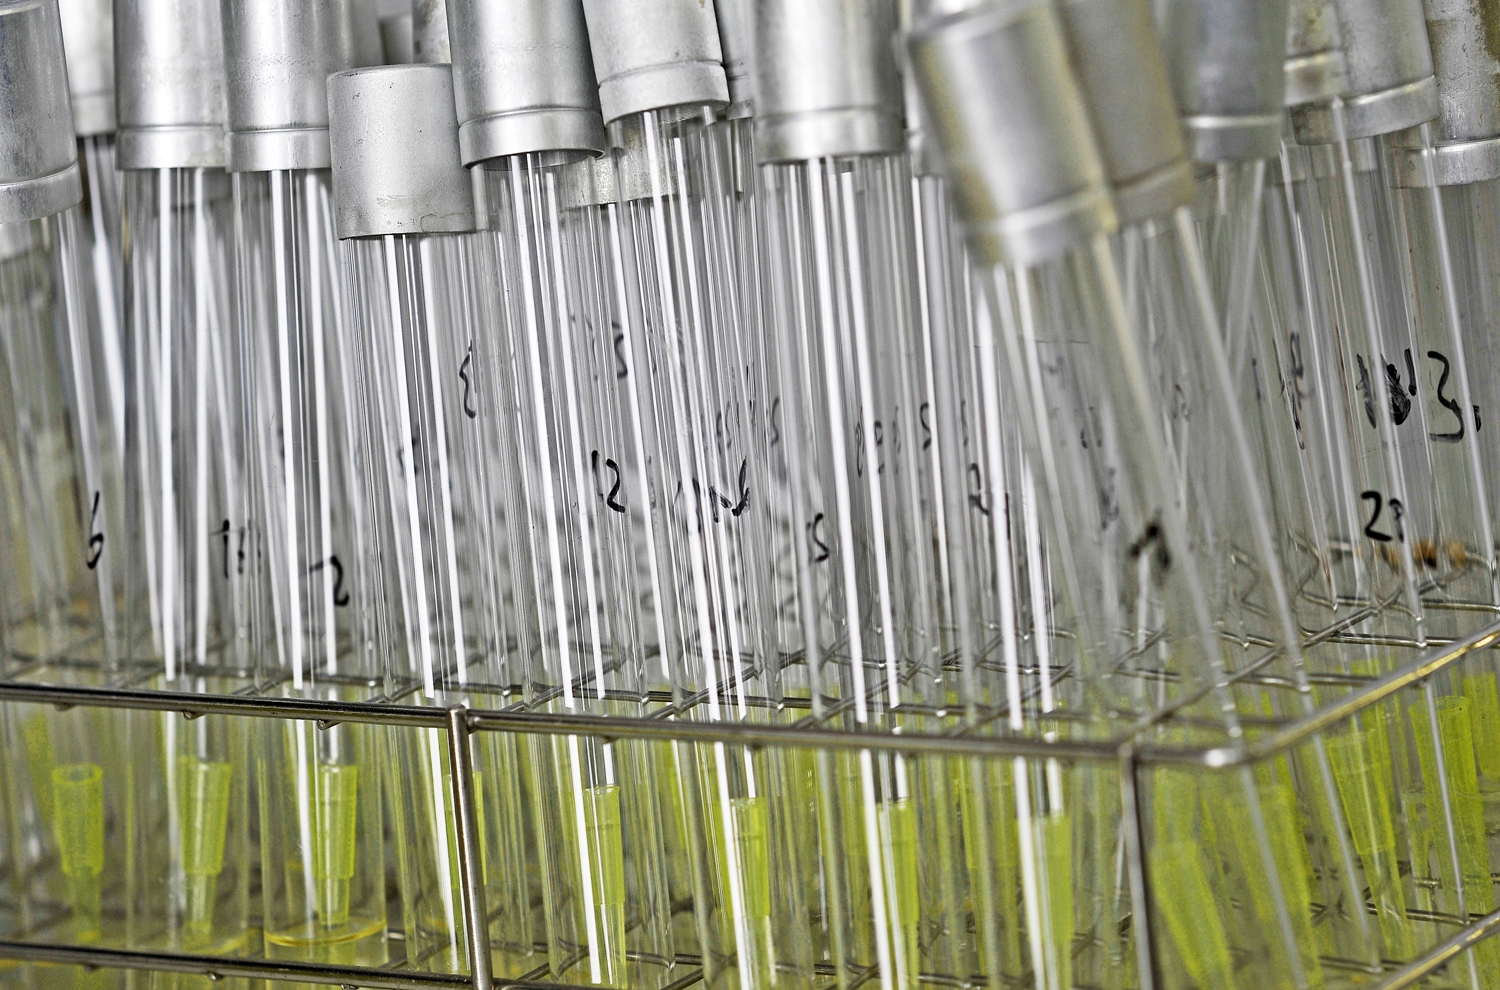 The photo shows dozens of glass tubes standing in a rack. The tubes contain a greenish, transparent liquid.